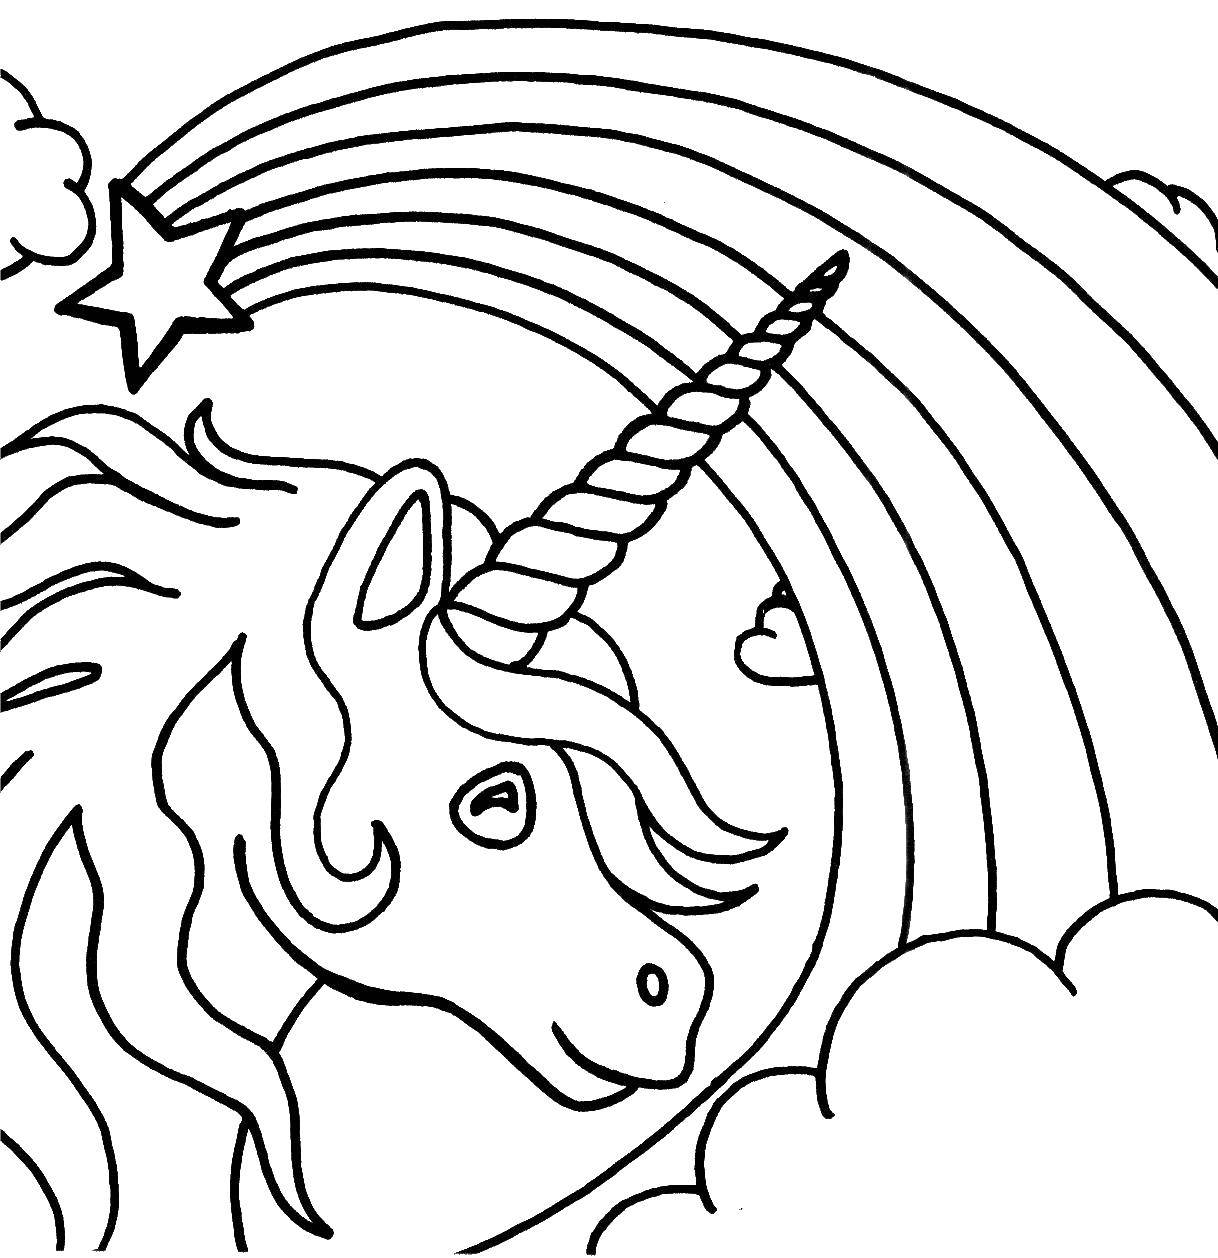 Coloring Unicorn with rainbow. Category coloring. Tags:  unicorn, rainbow, star.